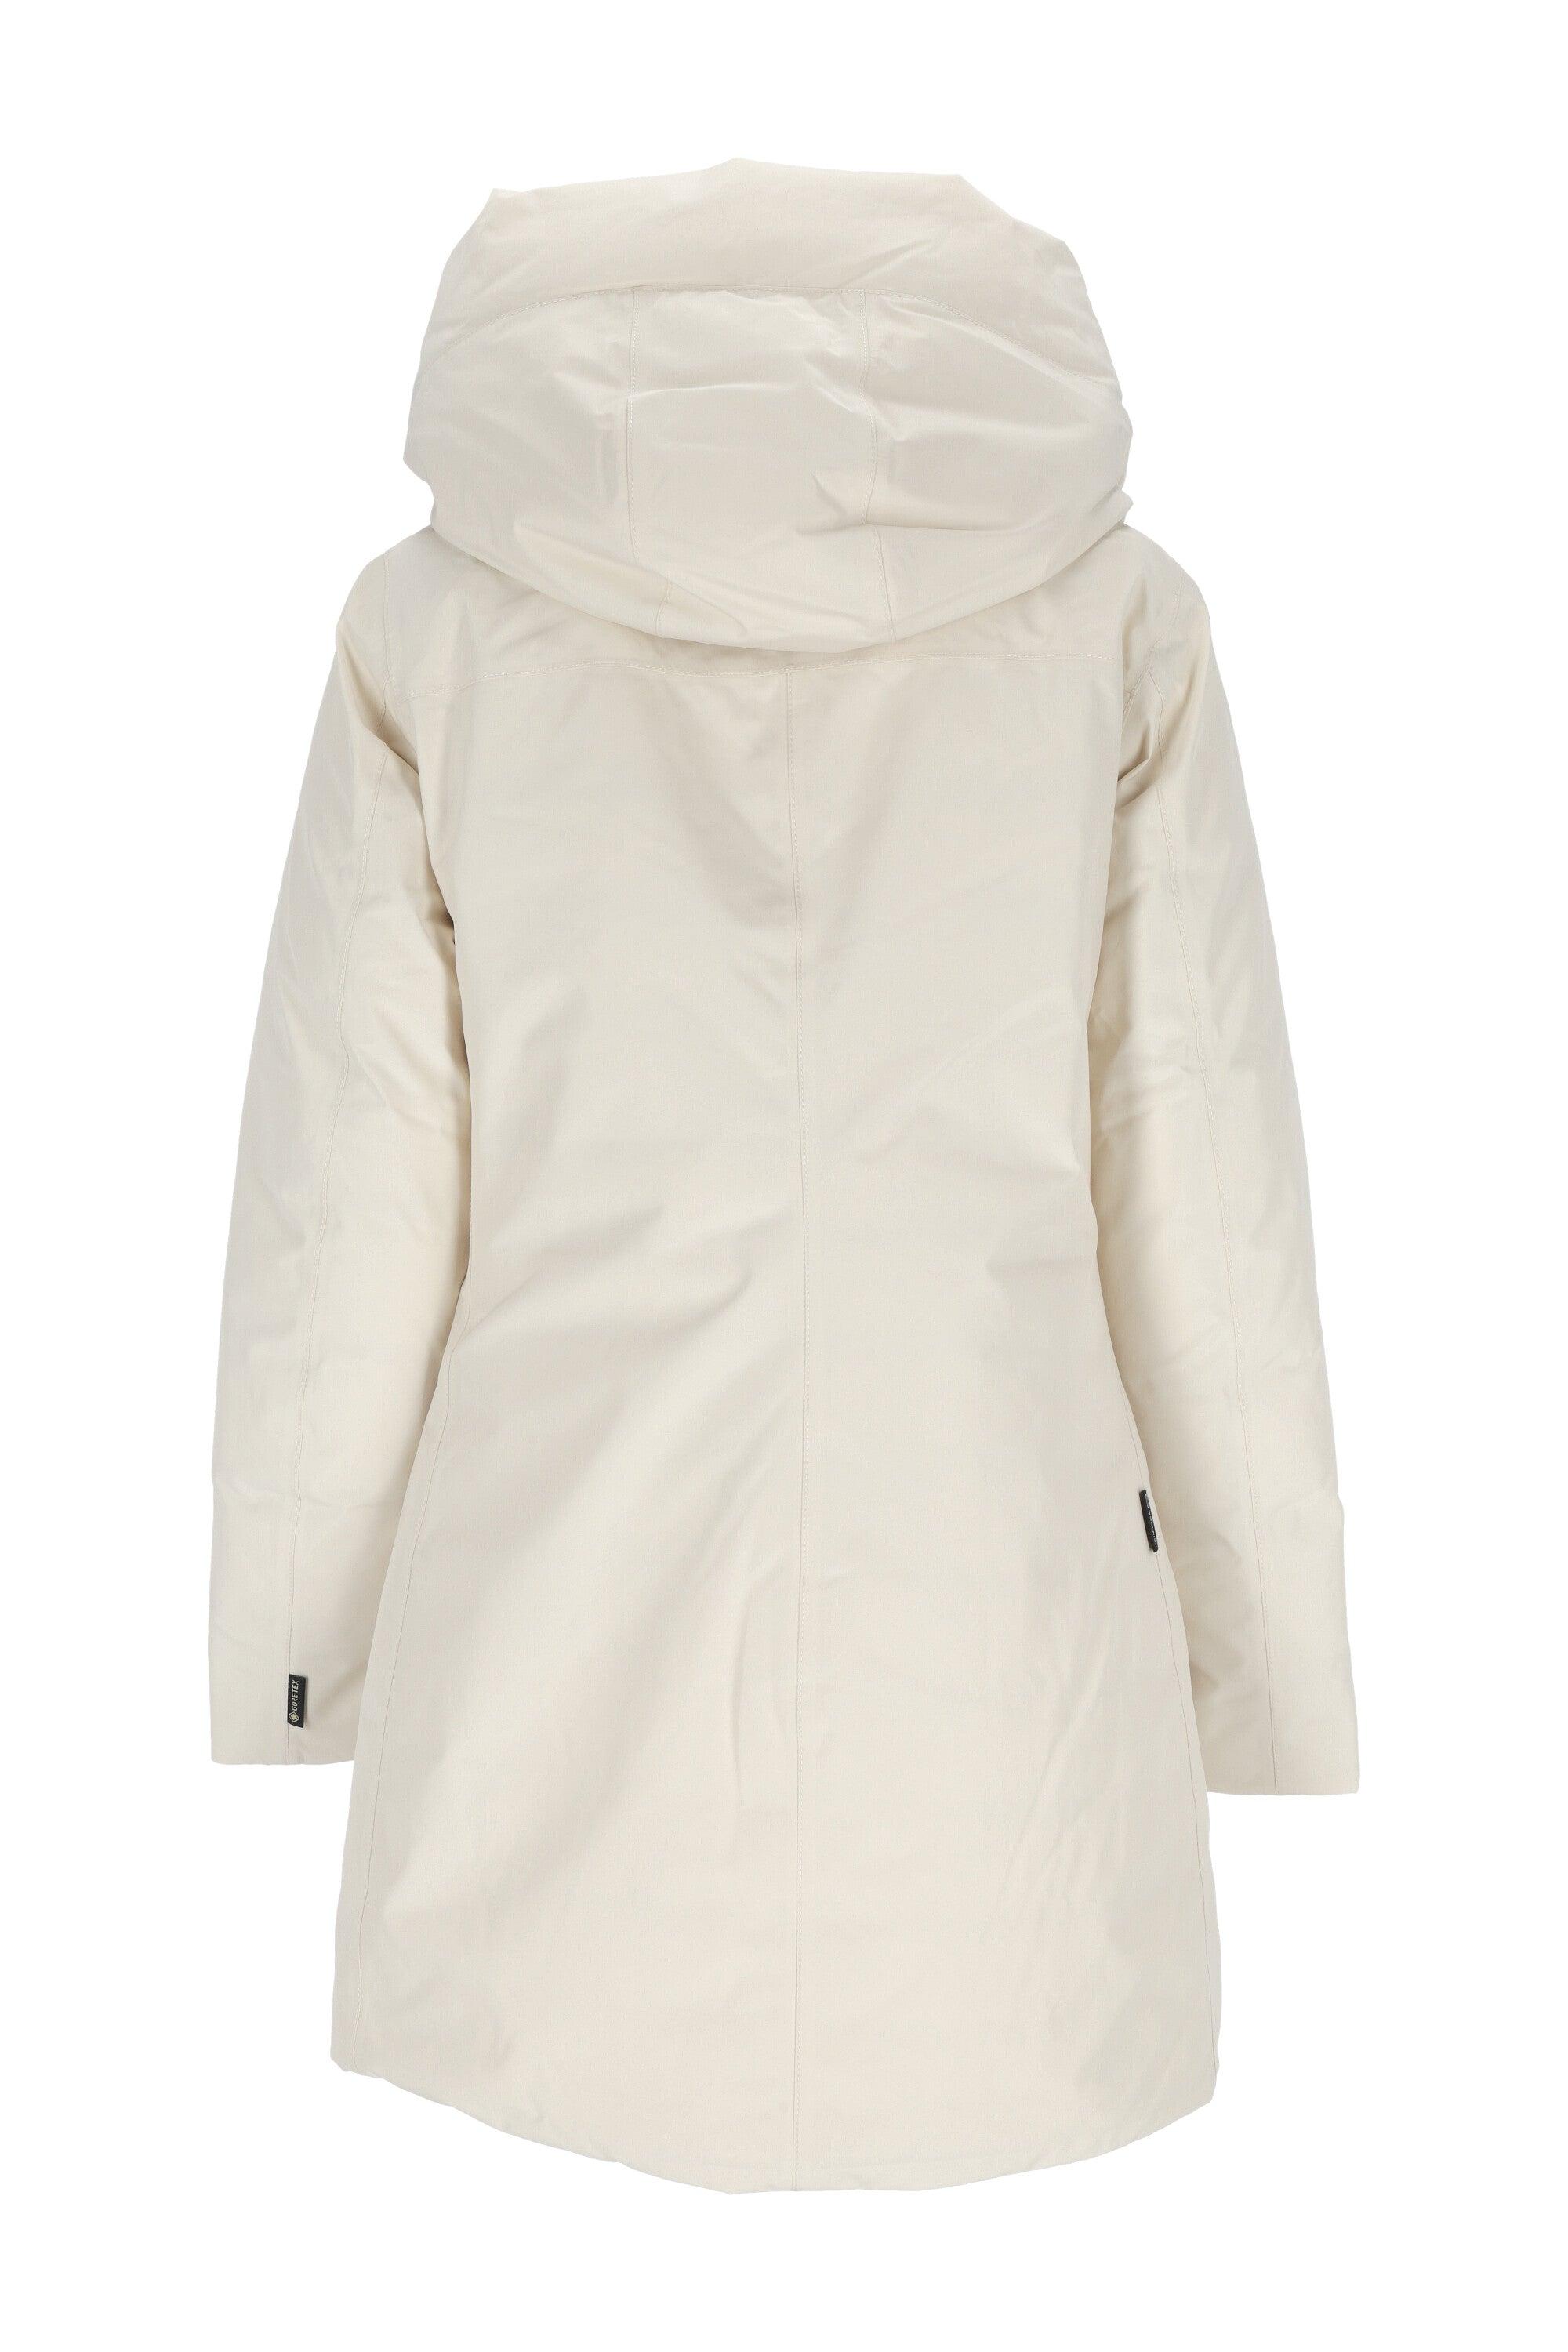 Woolrich Marshall Hooded Parka in White Lyst